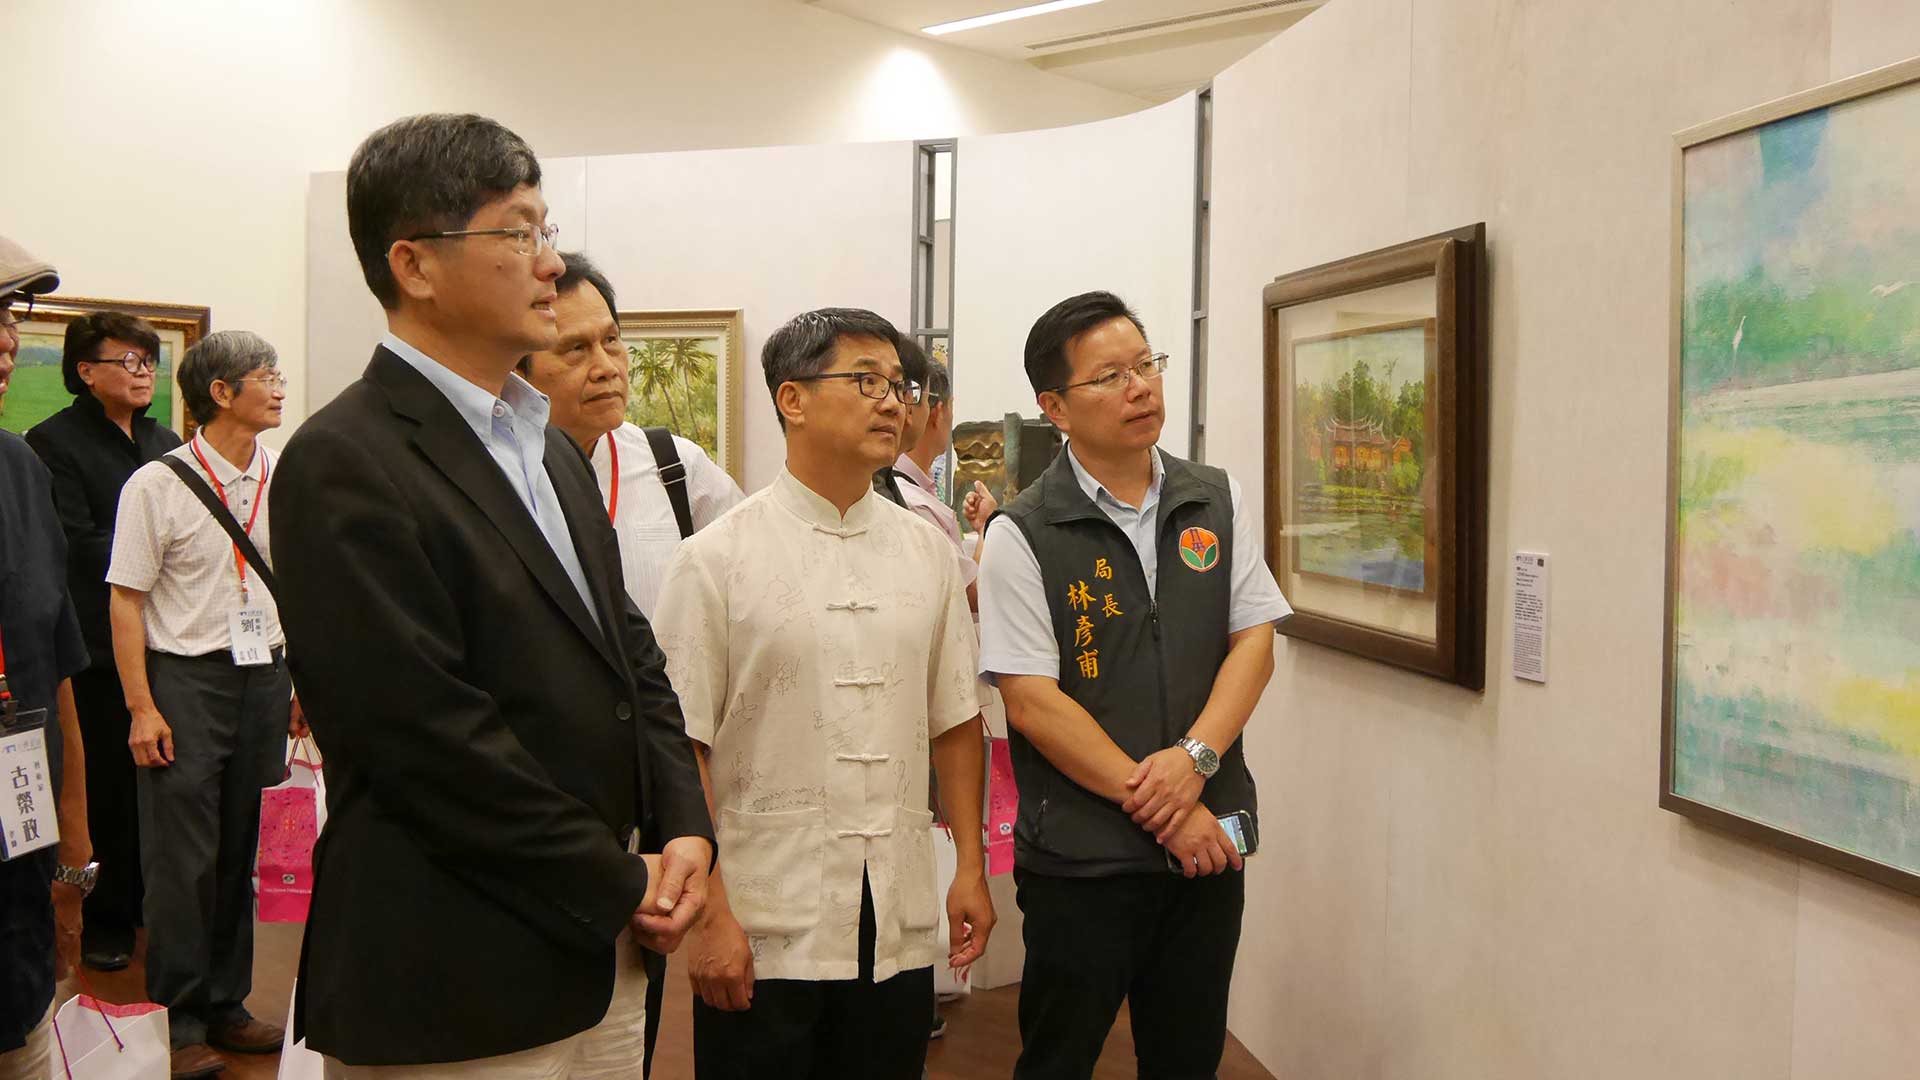 Guided tour for “Classic Artists” area of “2019 Hakka Art Exhibition—Inner State of Mind / New Realm”